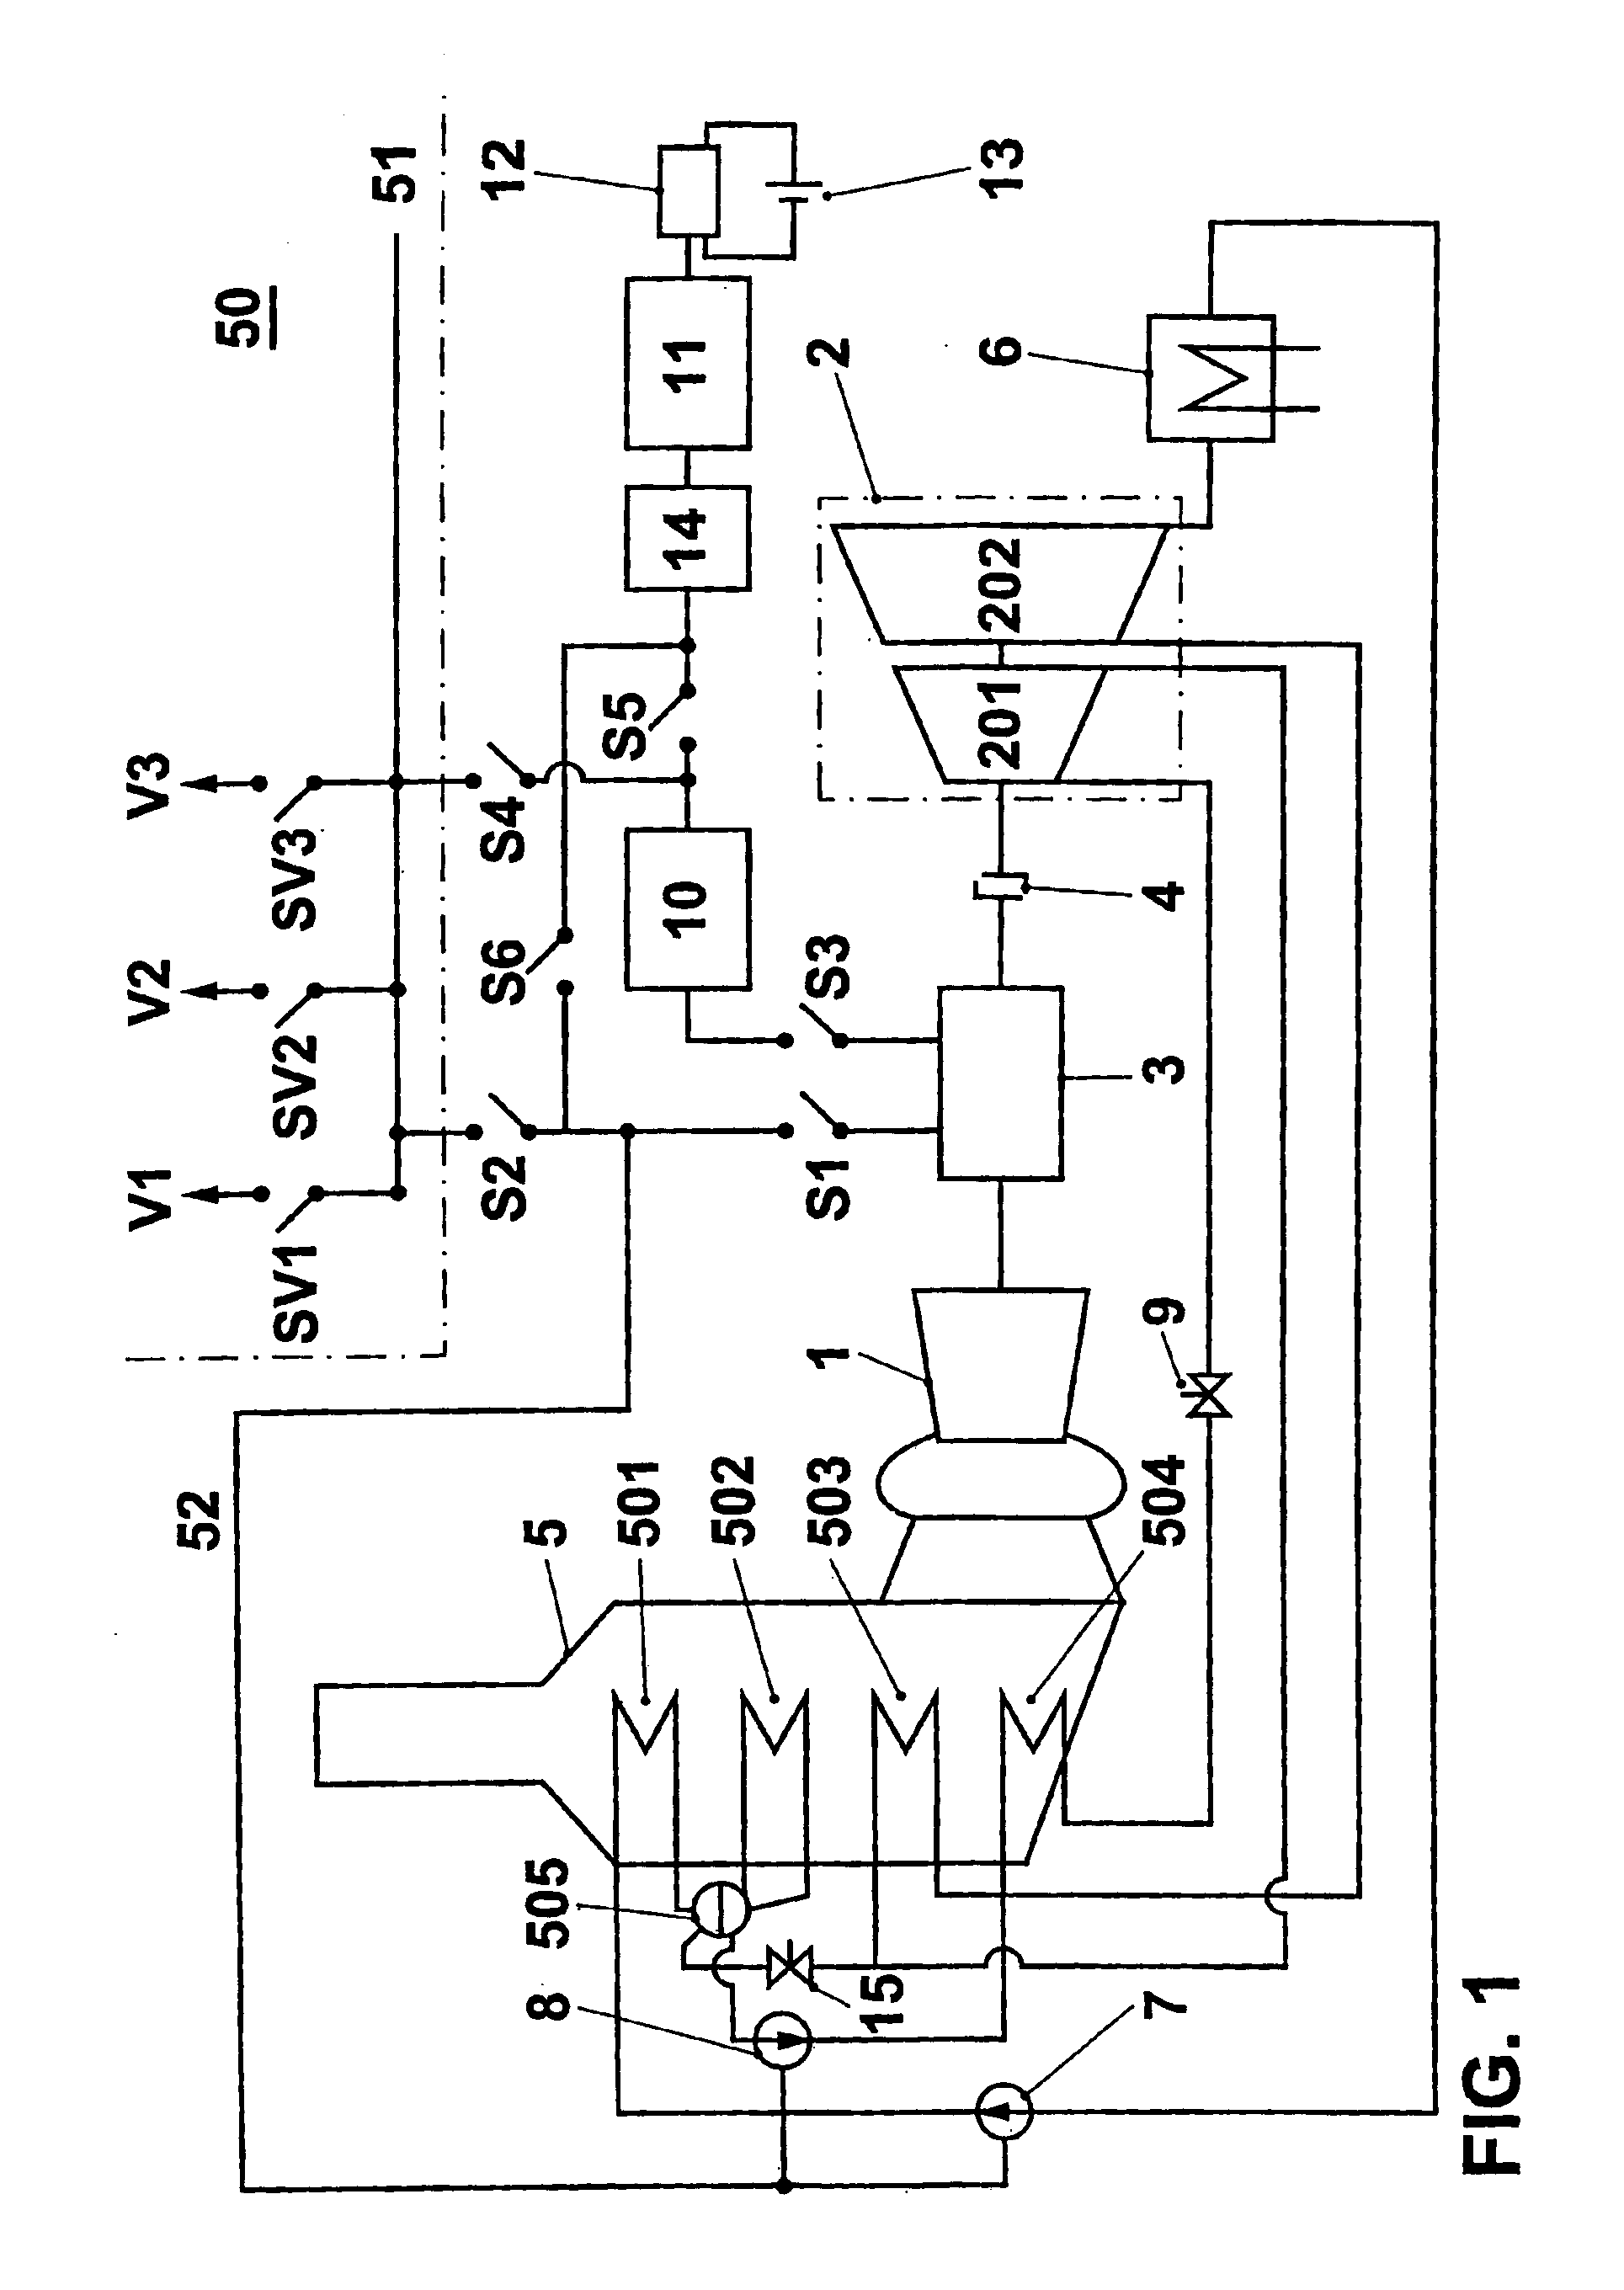 Method for starting up and loading a combined power plant